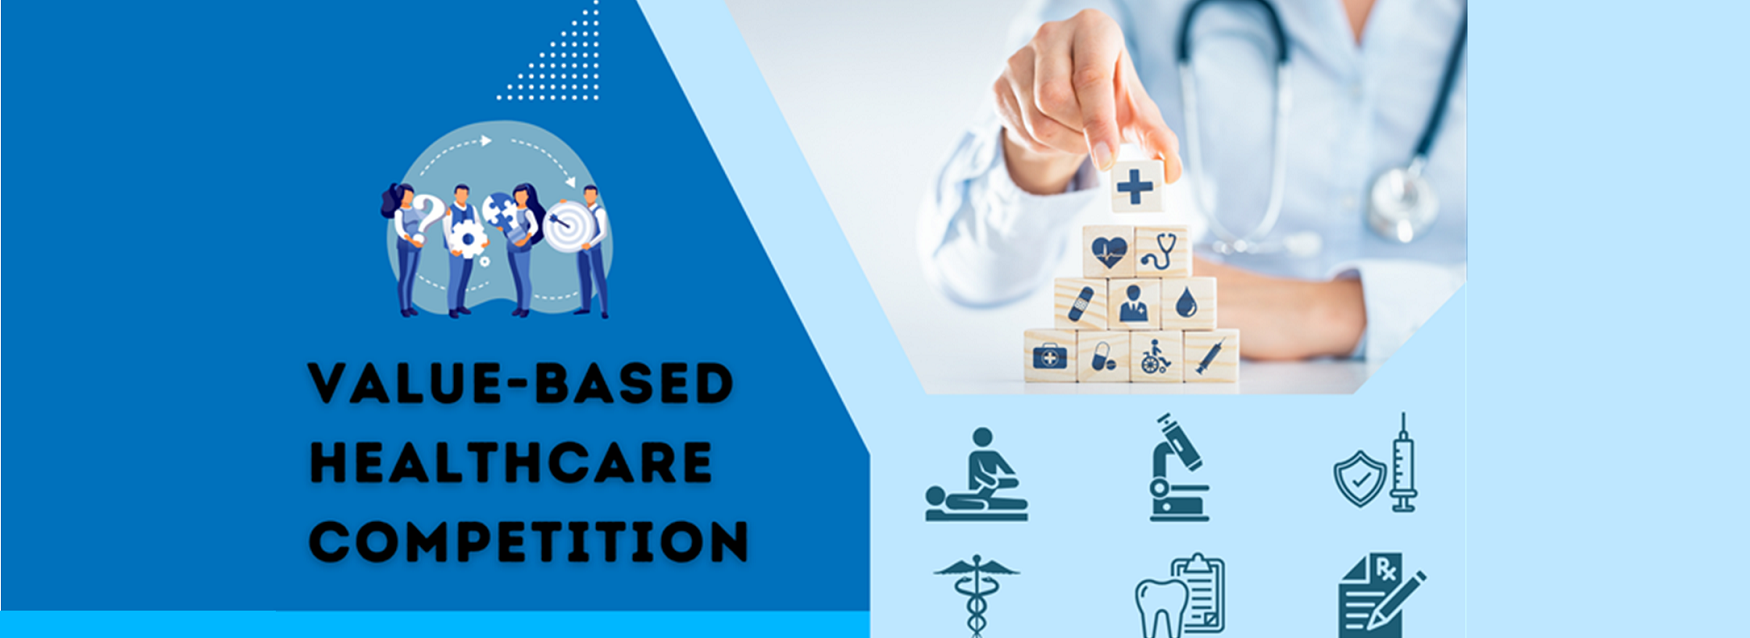 Value Based HealthCare competition text with medical icons in the background